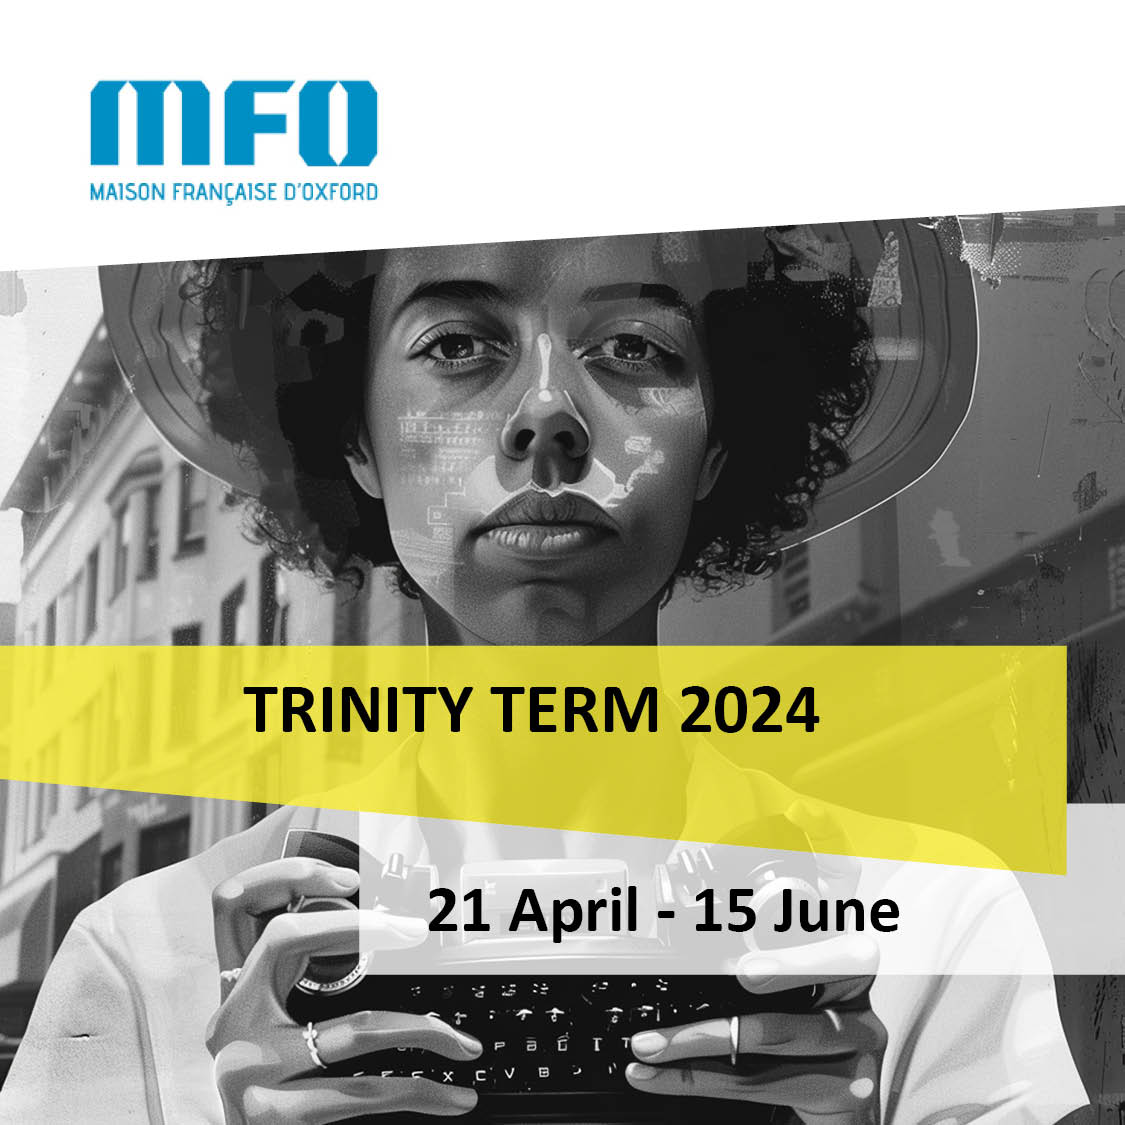 Our latest newsletter is out & our term card for TT 2024 is now available 👉mfo.web.ox.ac.uk/sitefiles/prog… Academics, undergraduates, graduate students and members of the public are welcome to attend our #seminars, #workshops, #conferences & #freefilmscreenings Image: Midjourney